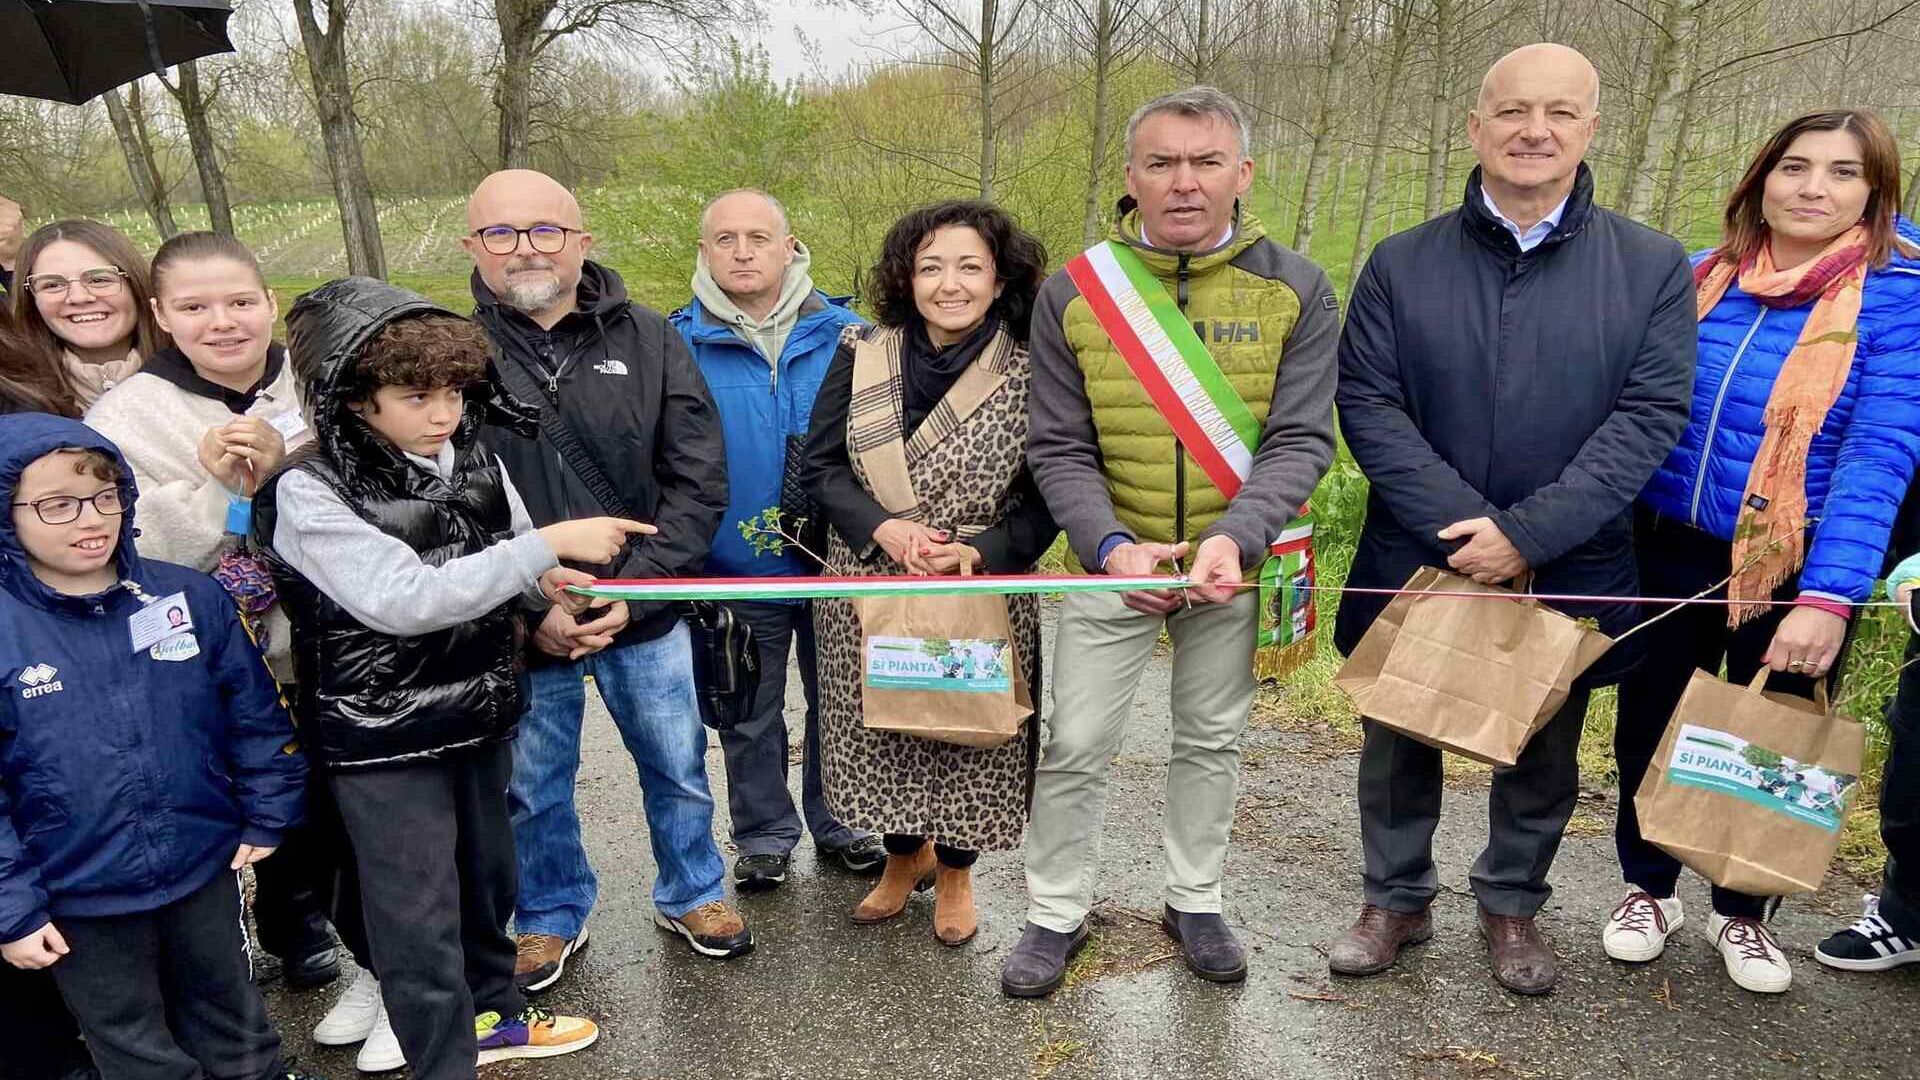 Urban reforestation: two new peri-urban forests, for 1084 trees and shrubs and 9.000 square meters of surface area, were inaugurated in Sissa Trecasali (Parma)